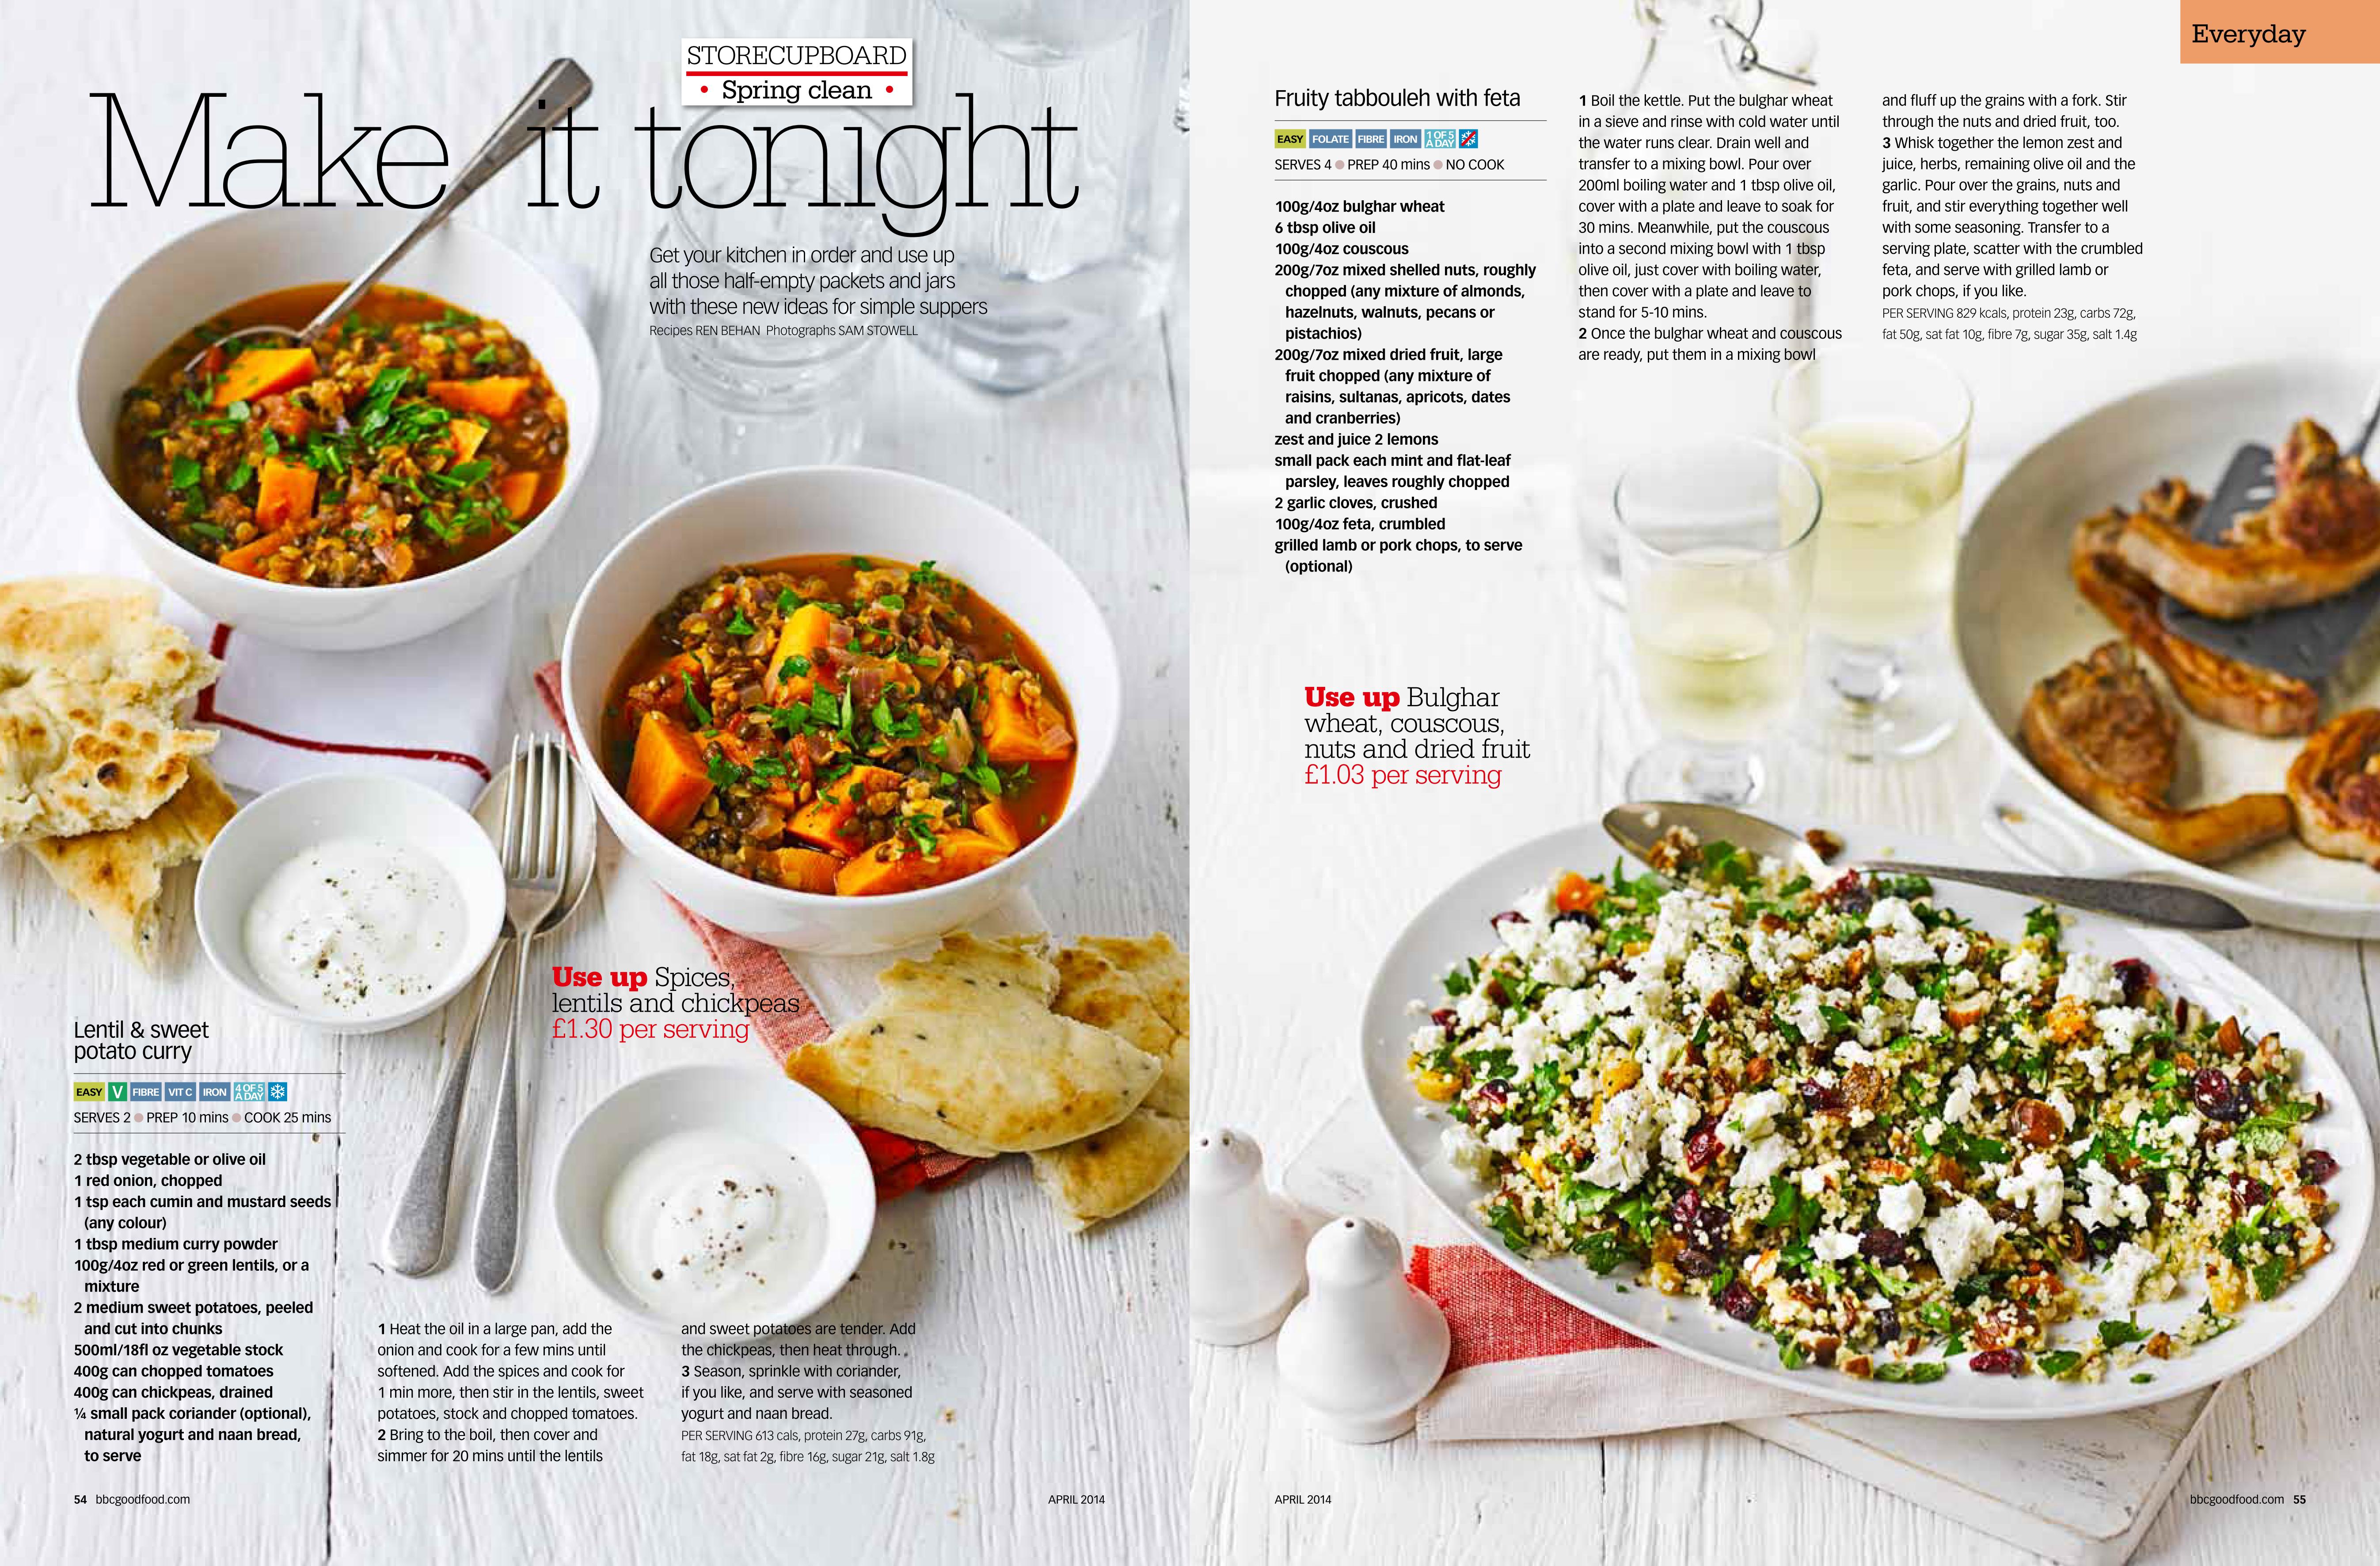 Five spring recipes in BBC Good Food Magazine